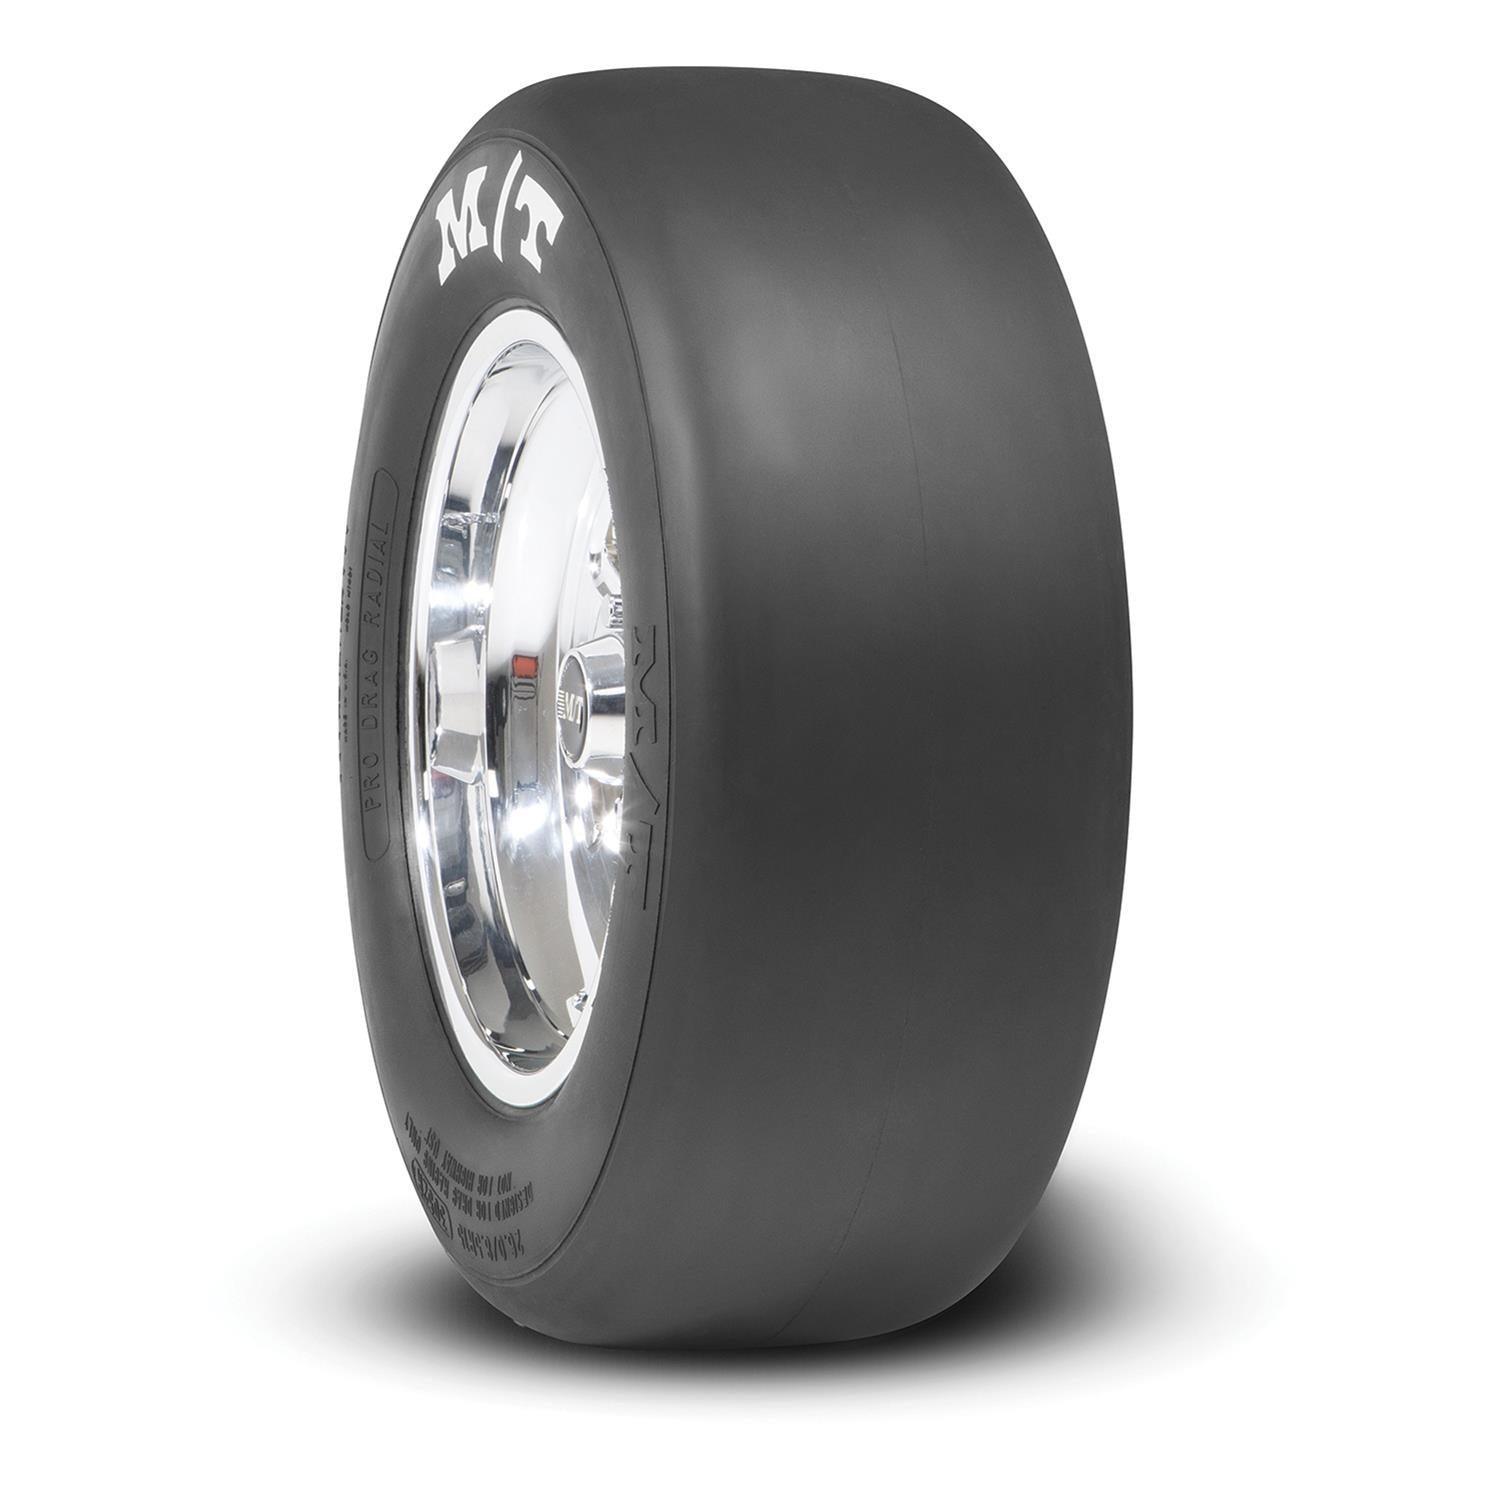 26.0/8.5R15 Pro Drag Radial Tire R1 - Burlile Performance Products